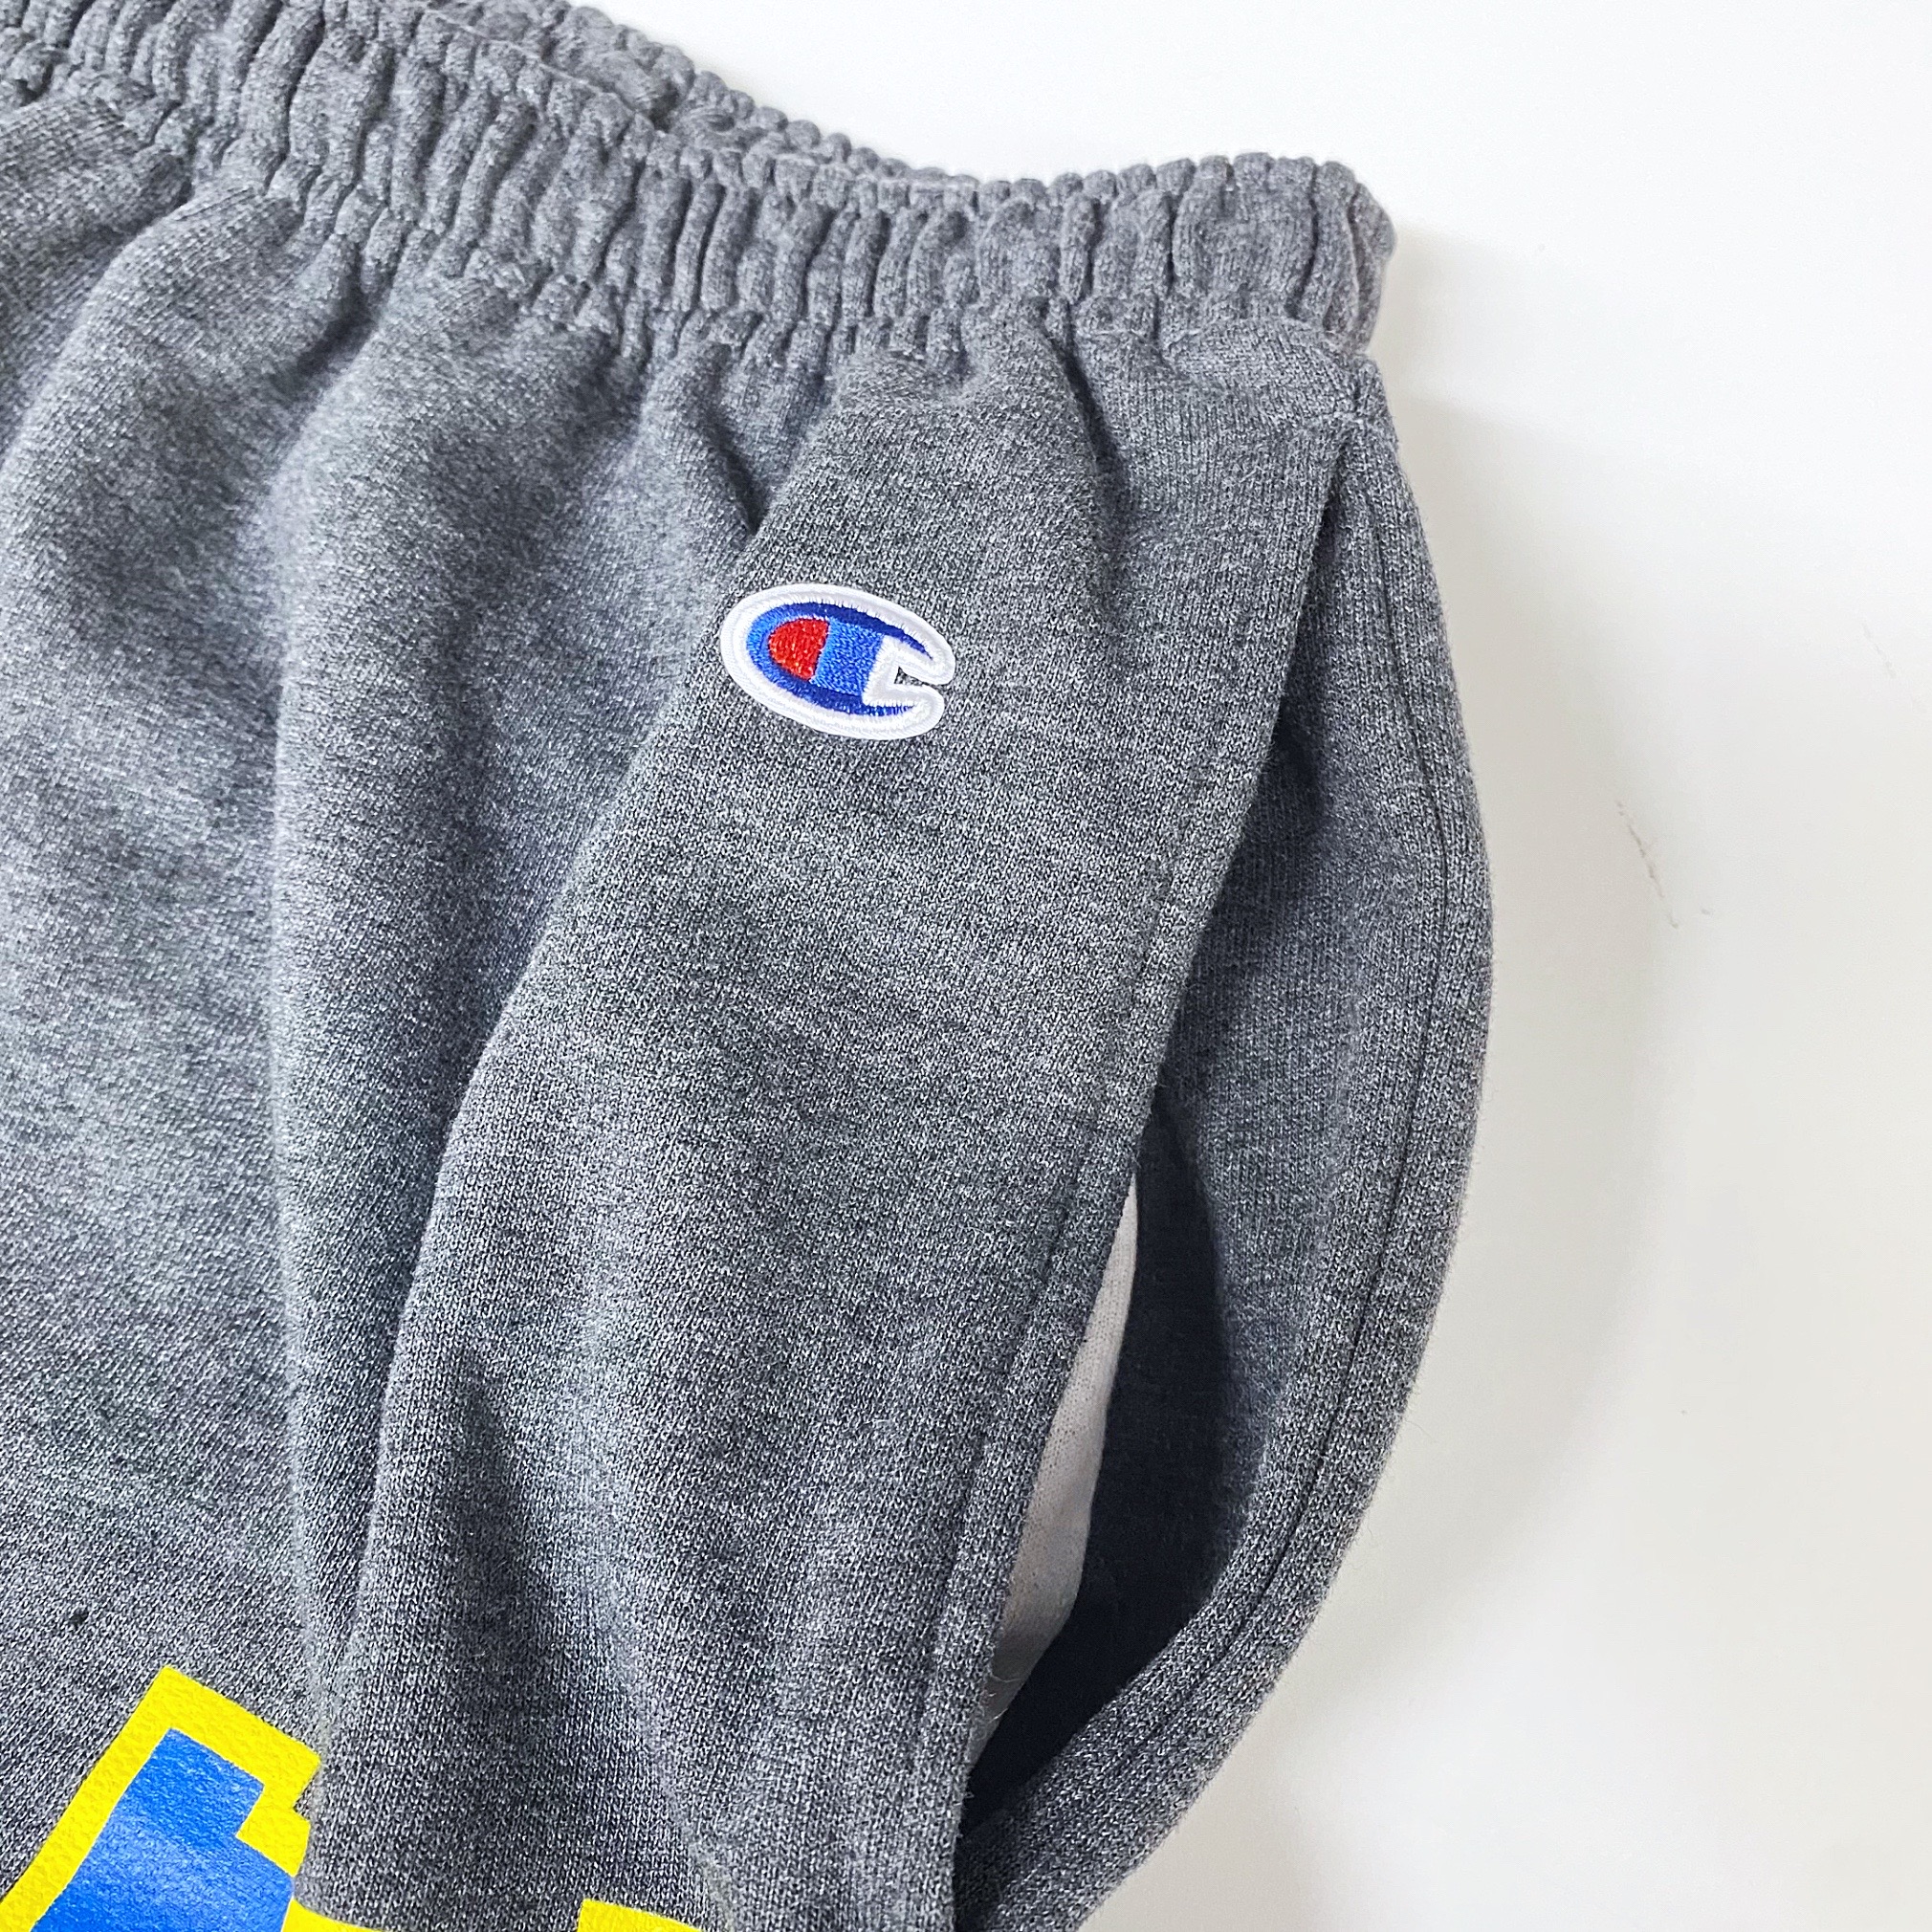 https://www.national5and10.com/wp-content/uploads/2019/01/University-of-Delaware-Champion-Sweatpants-Charcoal-2.jpg